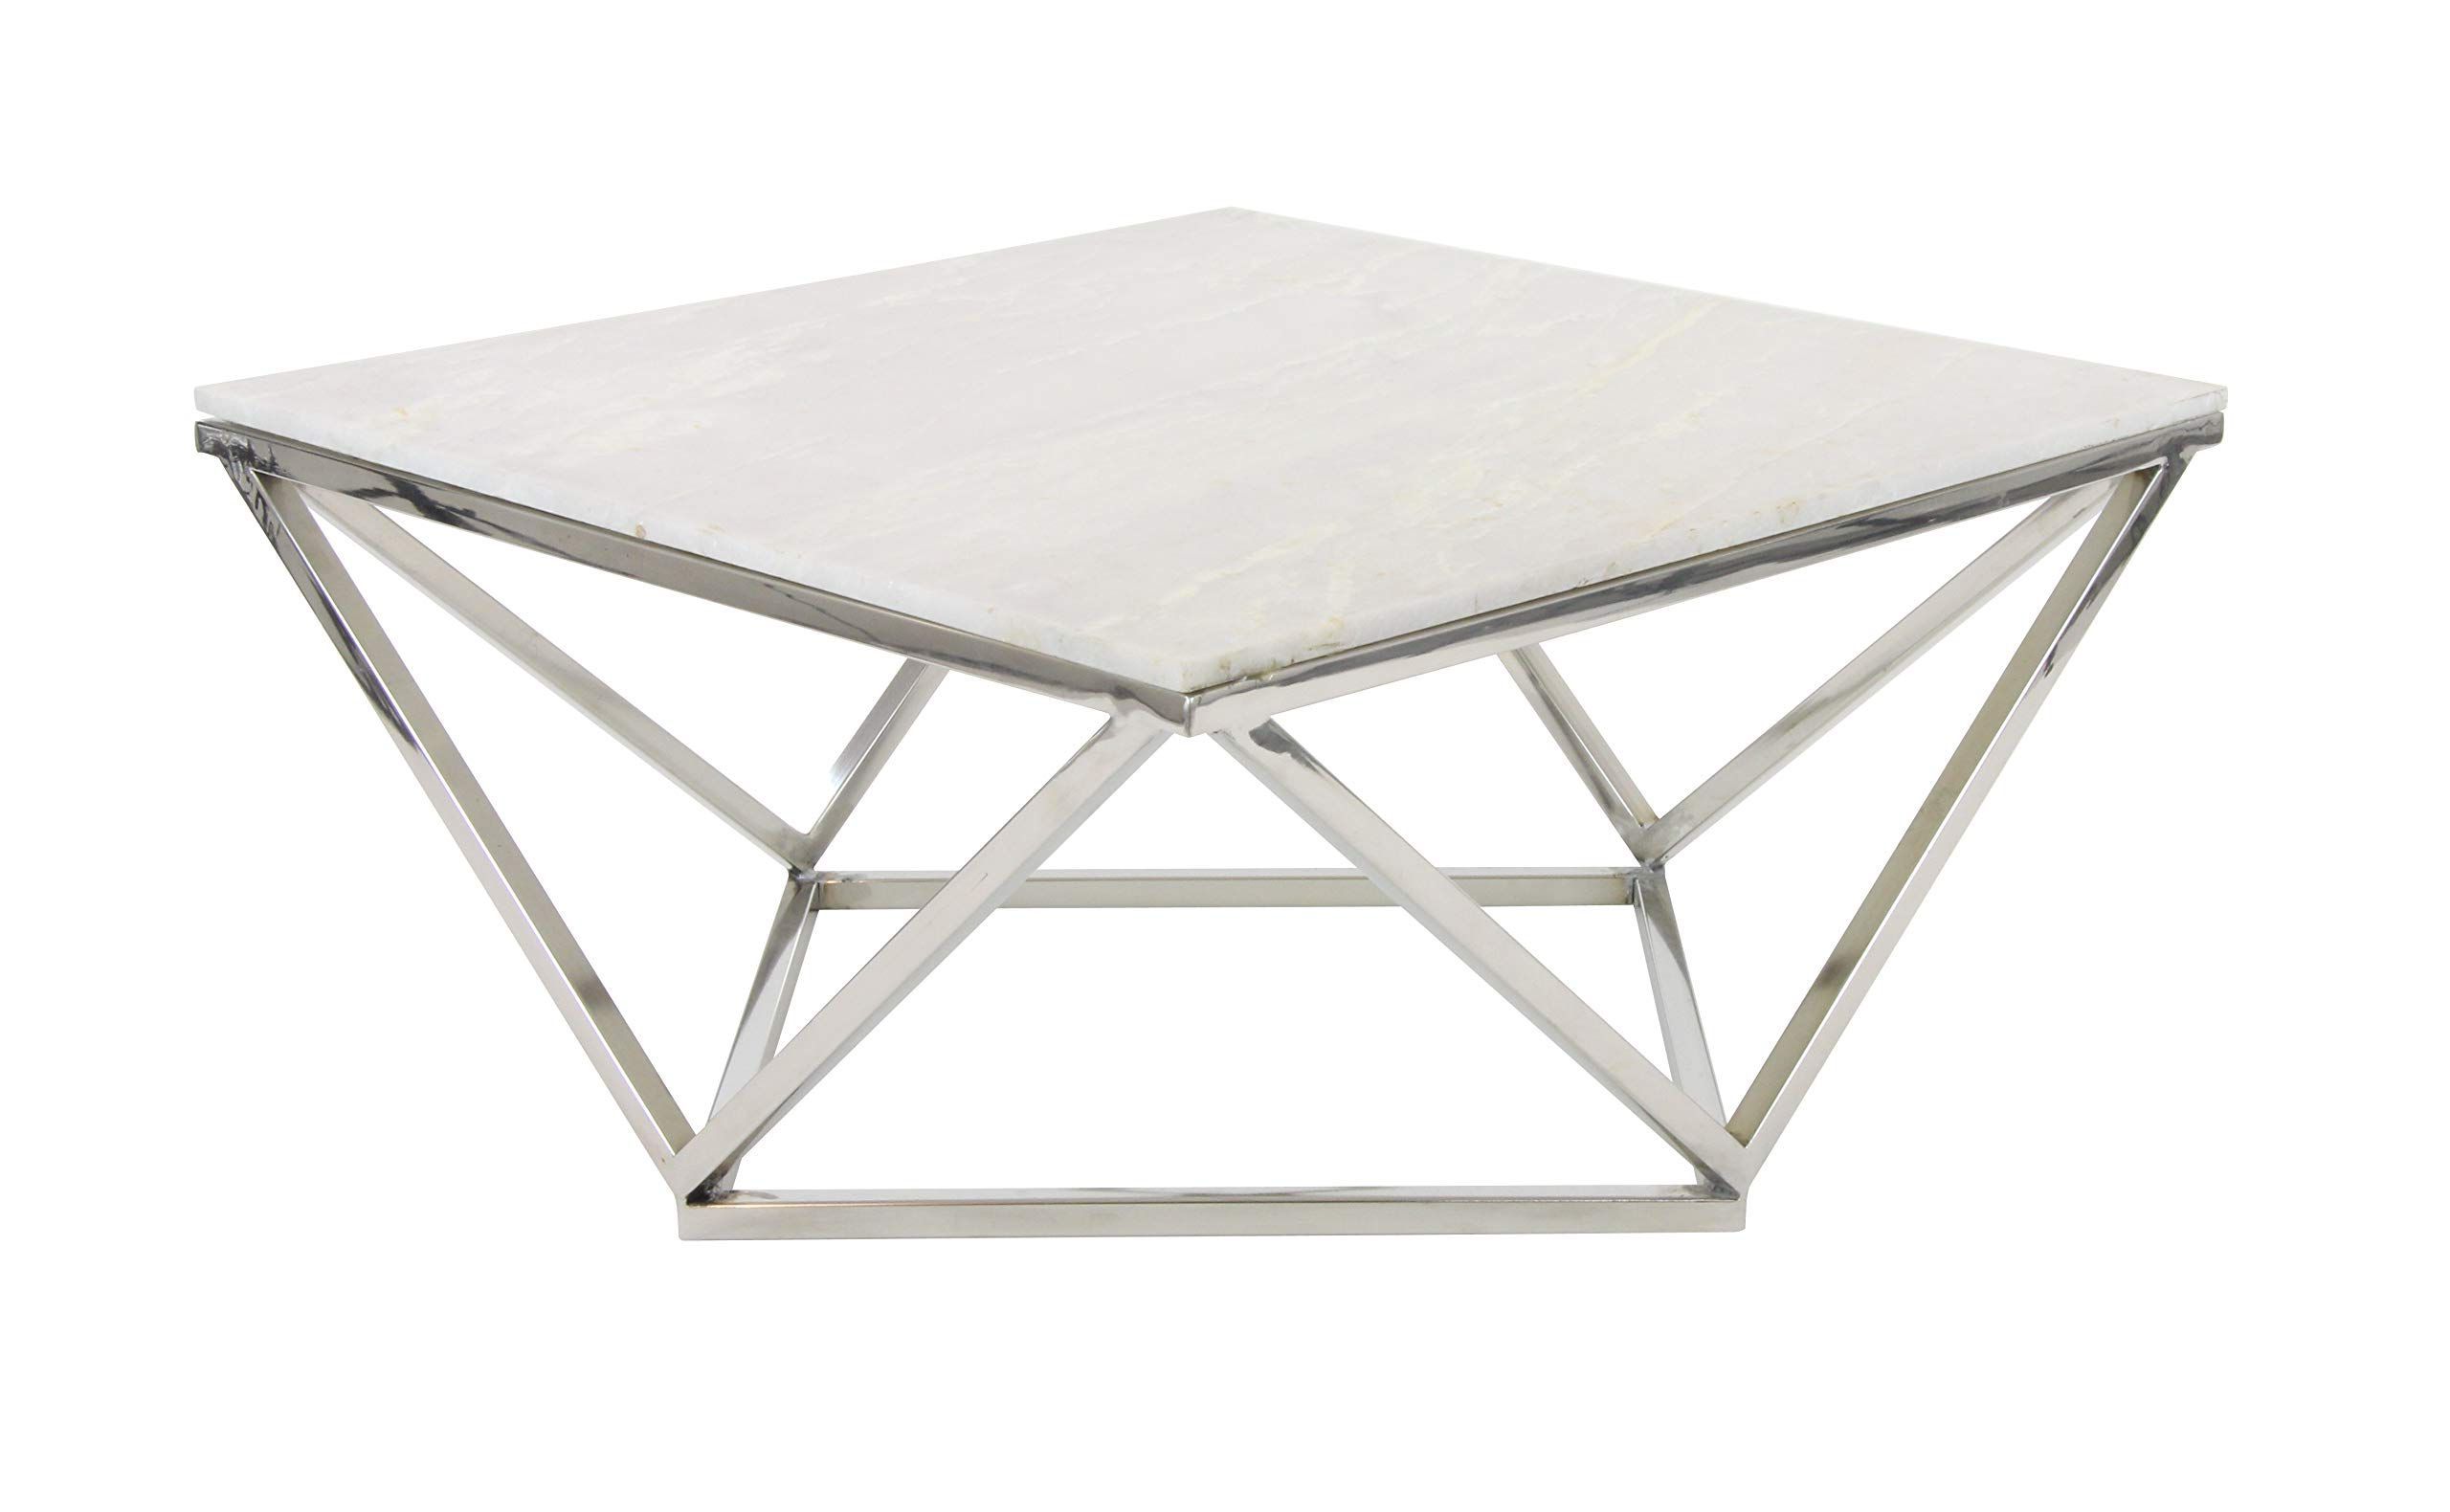 Deco 79 Square White Marble Coffee Table Silver Stainless Regarding Favorite White Geometric Coffee Tables (View 13 of 20)